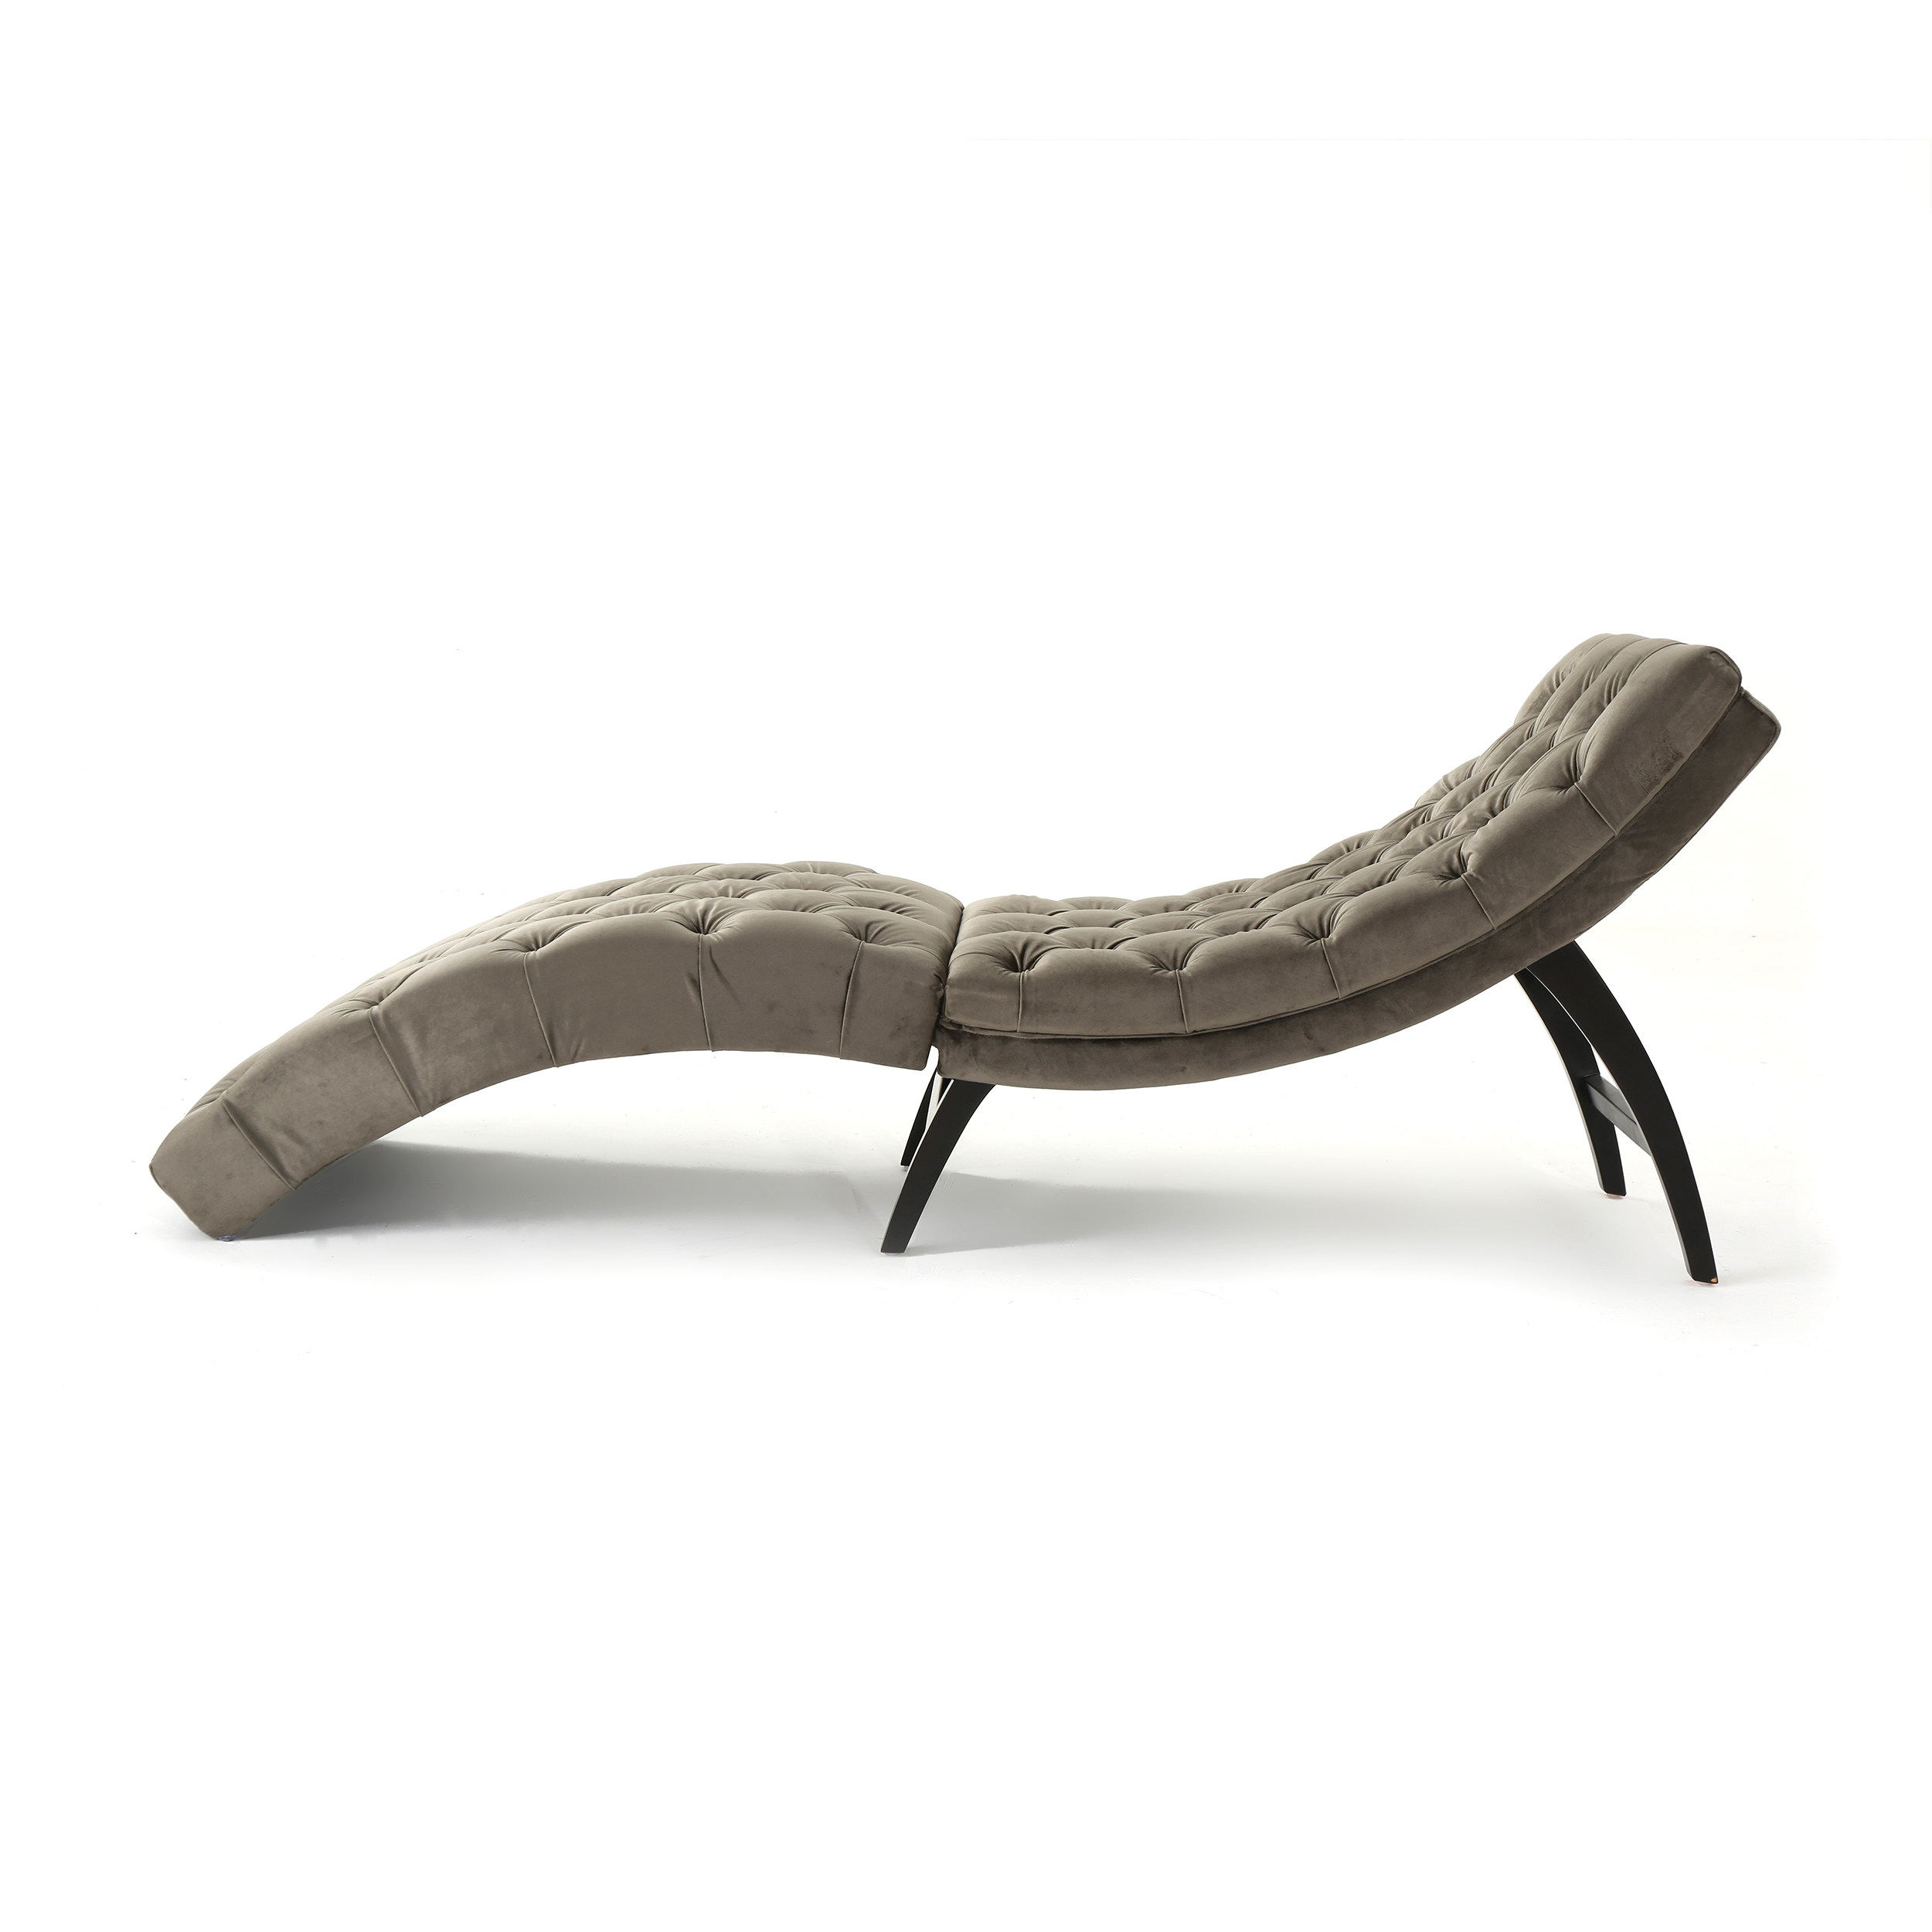 Garamond Traditional Indoor Tufted Velvet Chaise Lounge, Grey - image 5 of 9